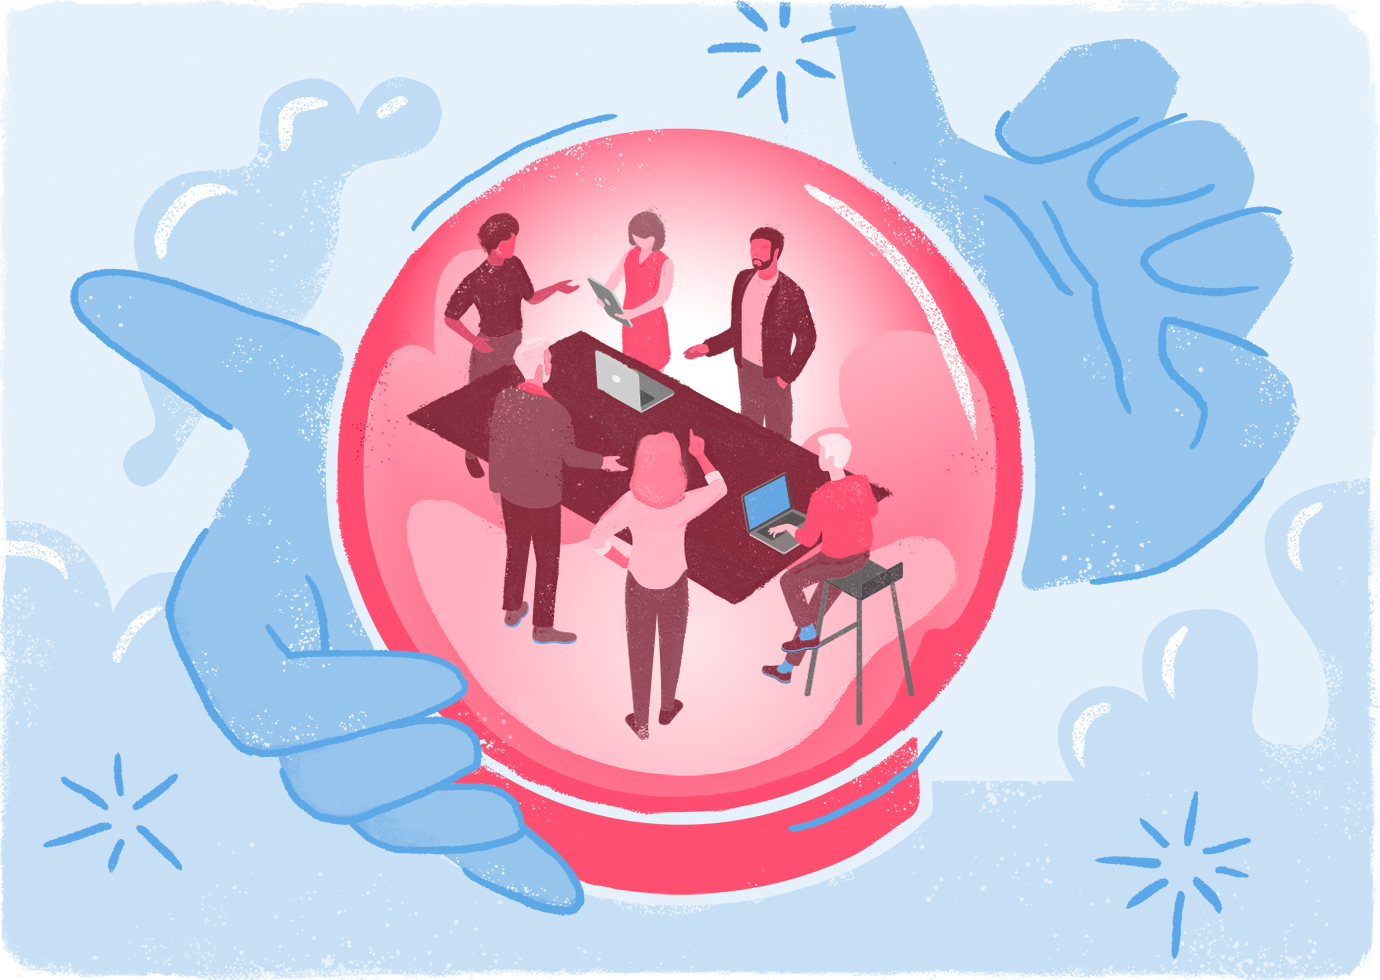 An illustration of a business meeting taking place inside of a crystal ball held by two hands.